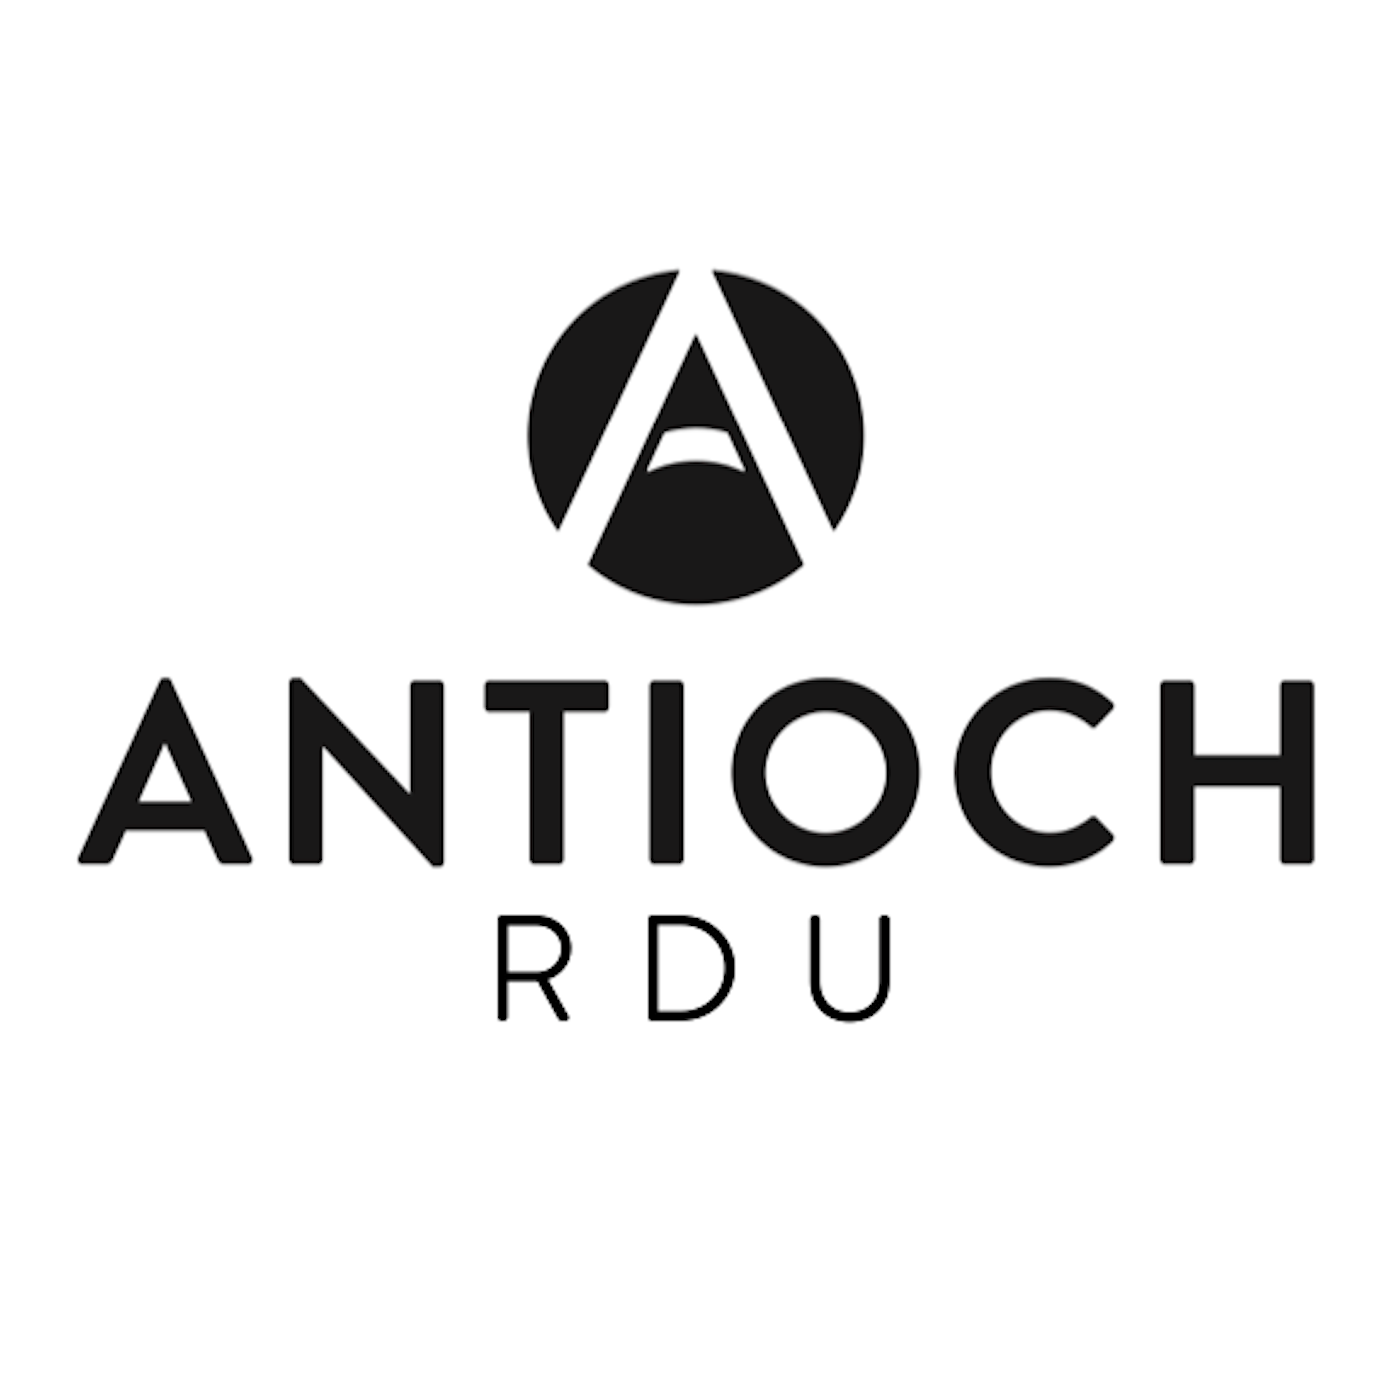 Weekly Podcast from Antioch Community Church in RDU